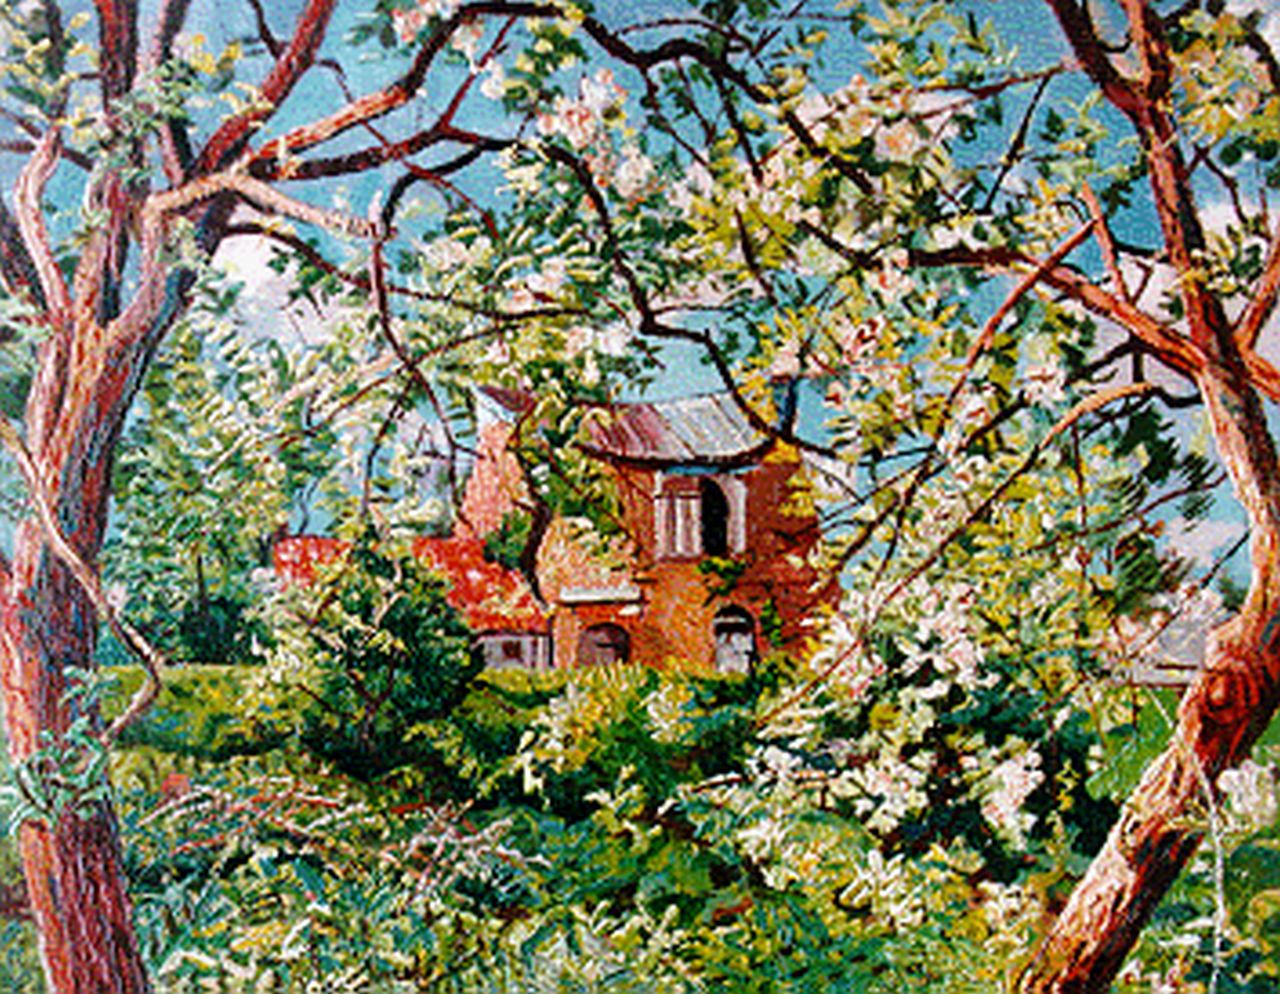 Bieling H.F.  | Hermann Friederich 'Herman' Bieling, An orchard in blossom, oil on canvas 46.3 x 60.4 cm, signed l.r. and dated '48